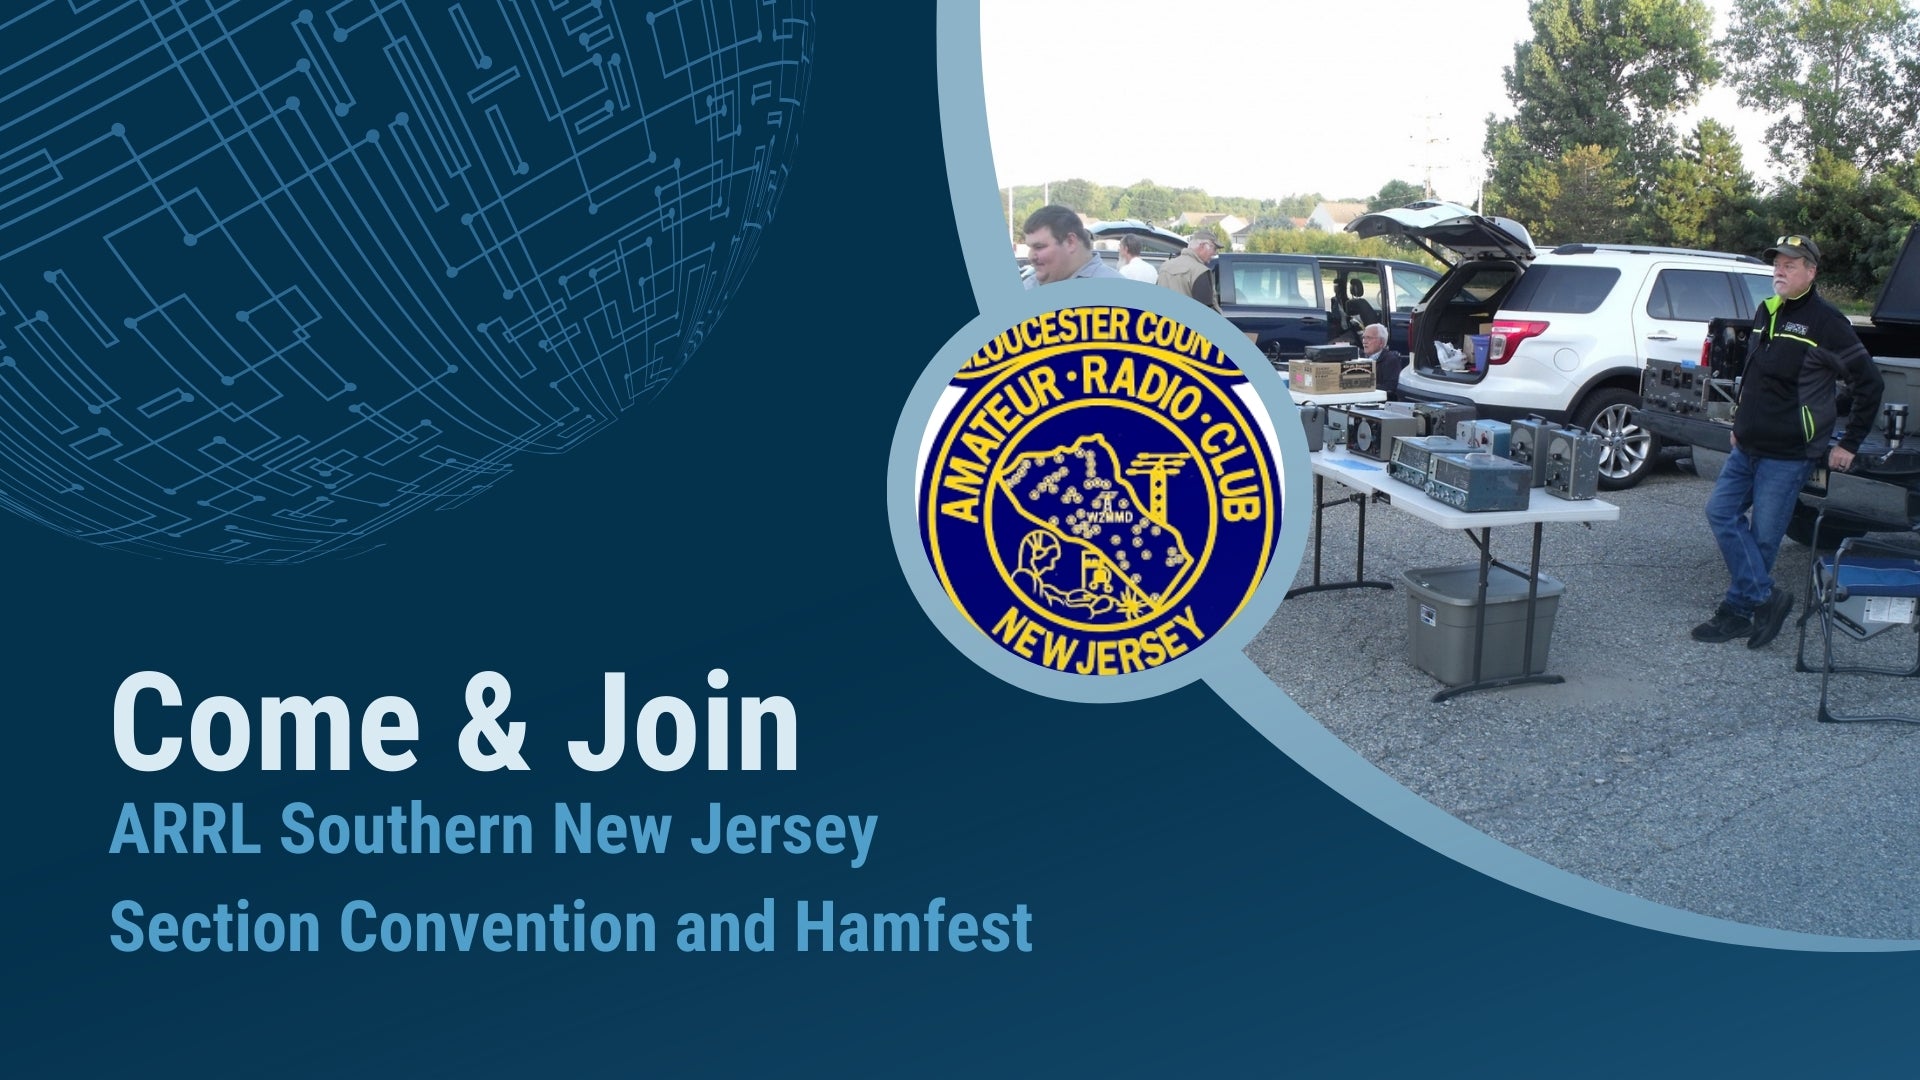 ARRL Southern New Jersey Section Convention and Hamfest